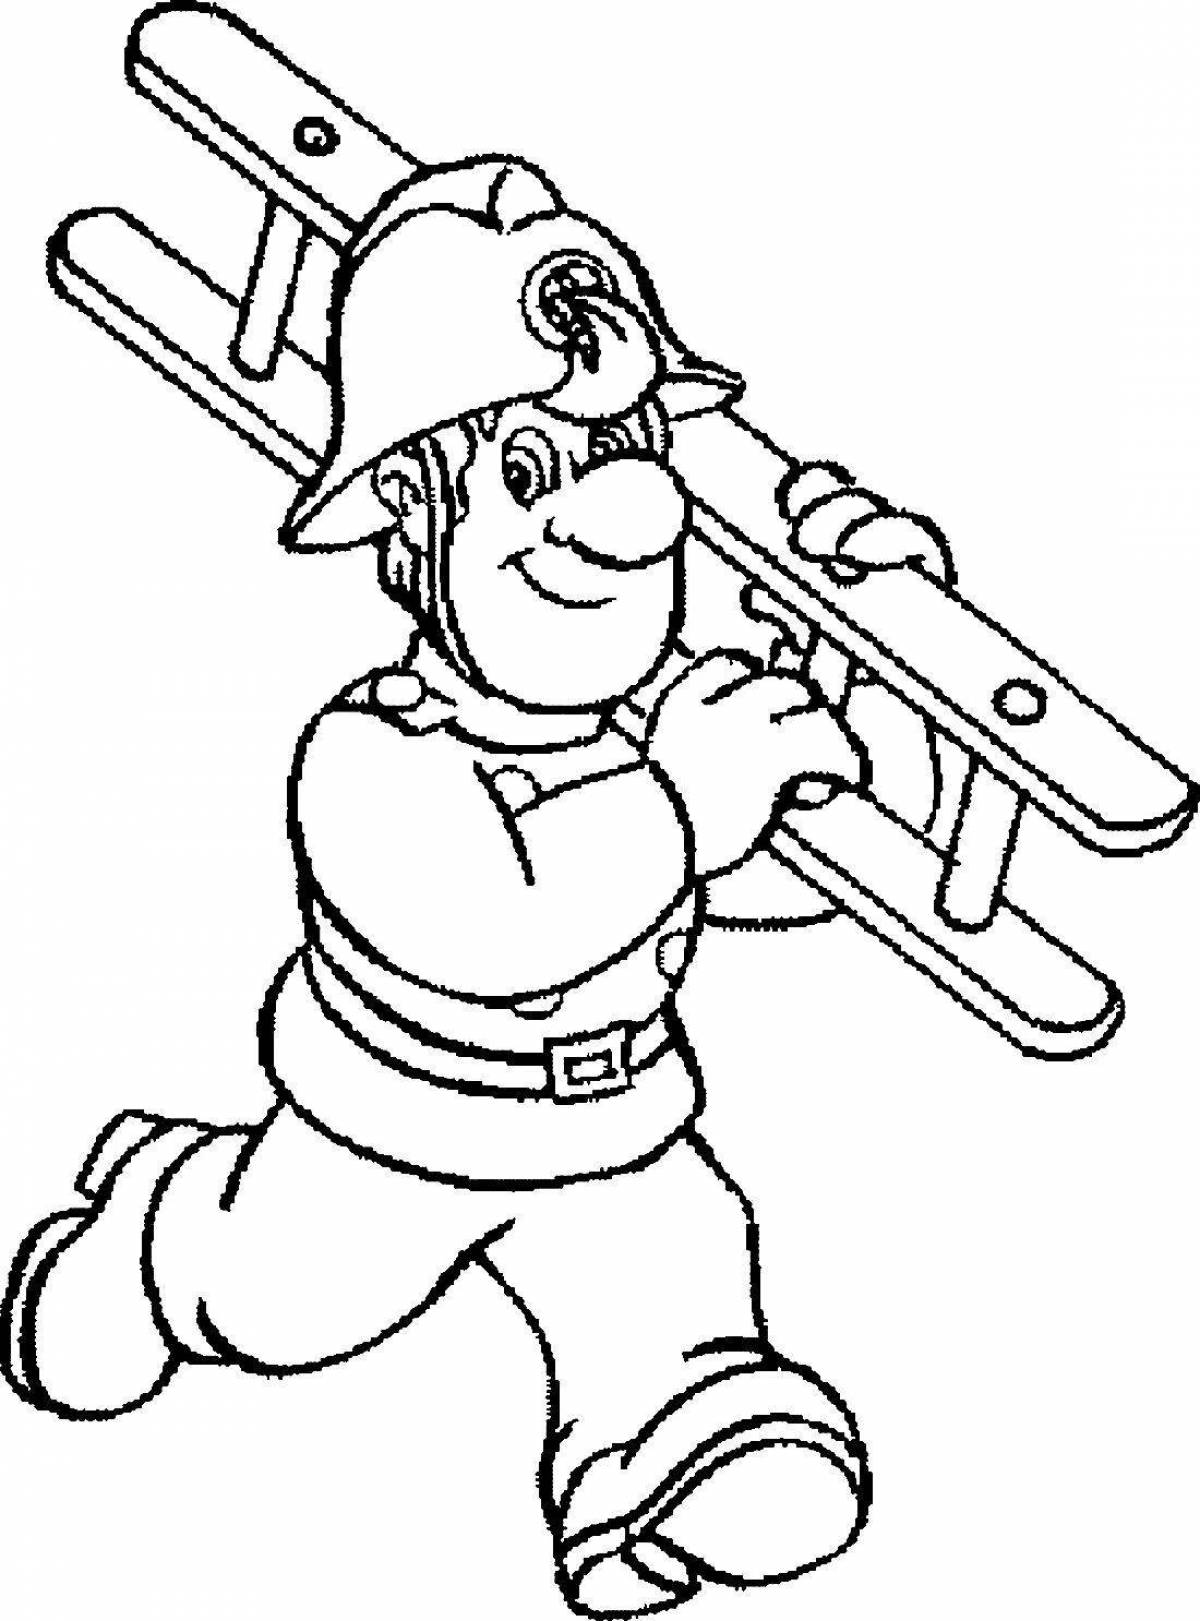 Coloring book innovative firefighter profession